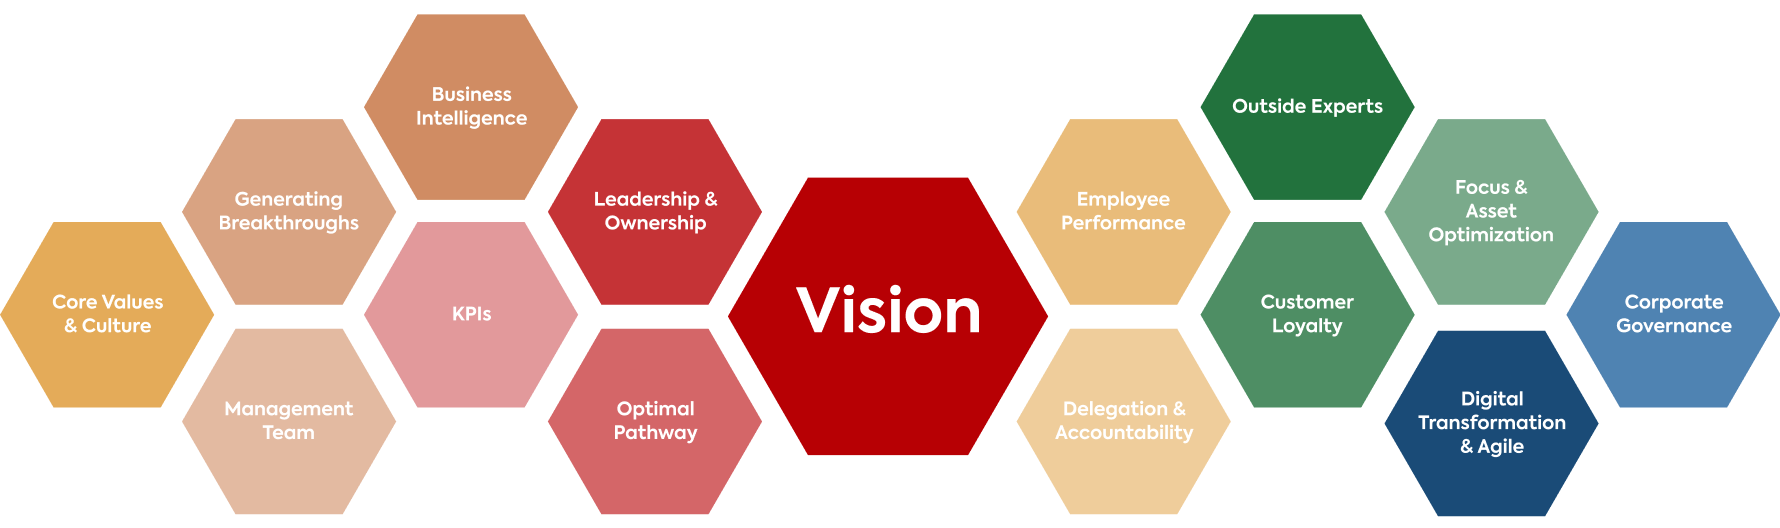 Starting from their committed vision, the VDI framework is essentially 15 perspectives to look from. Each company can continuously discover what works for them towards fulfilling their breakthrough vision.